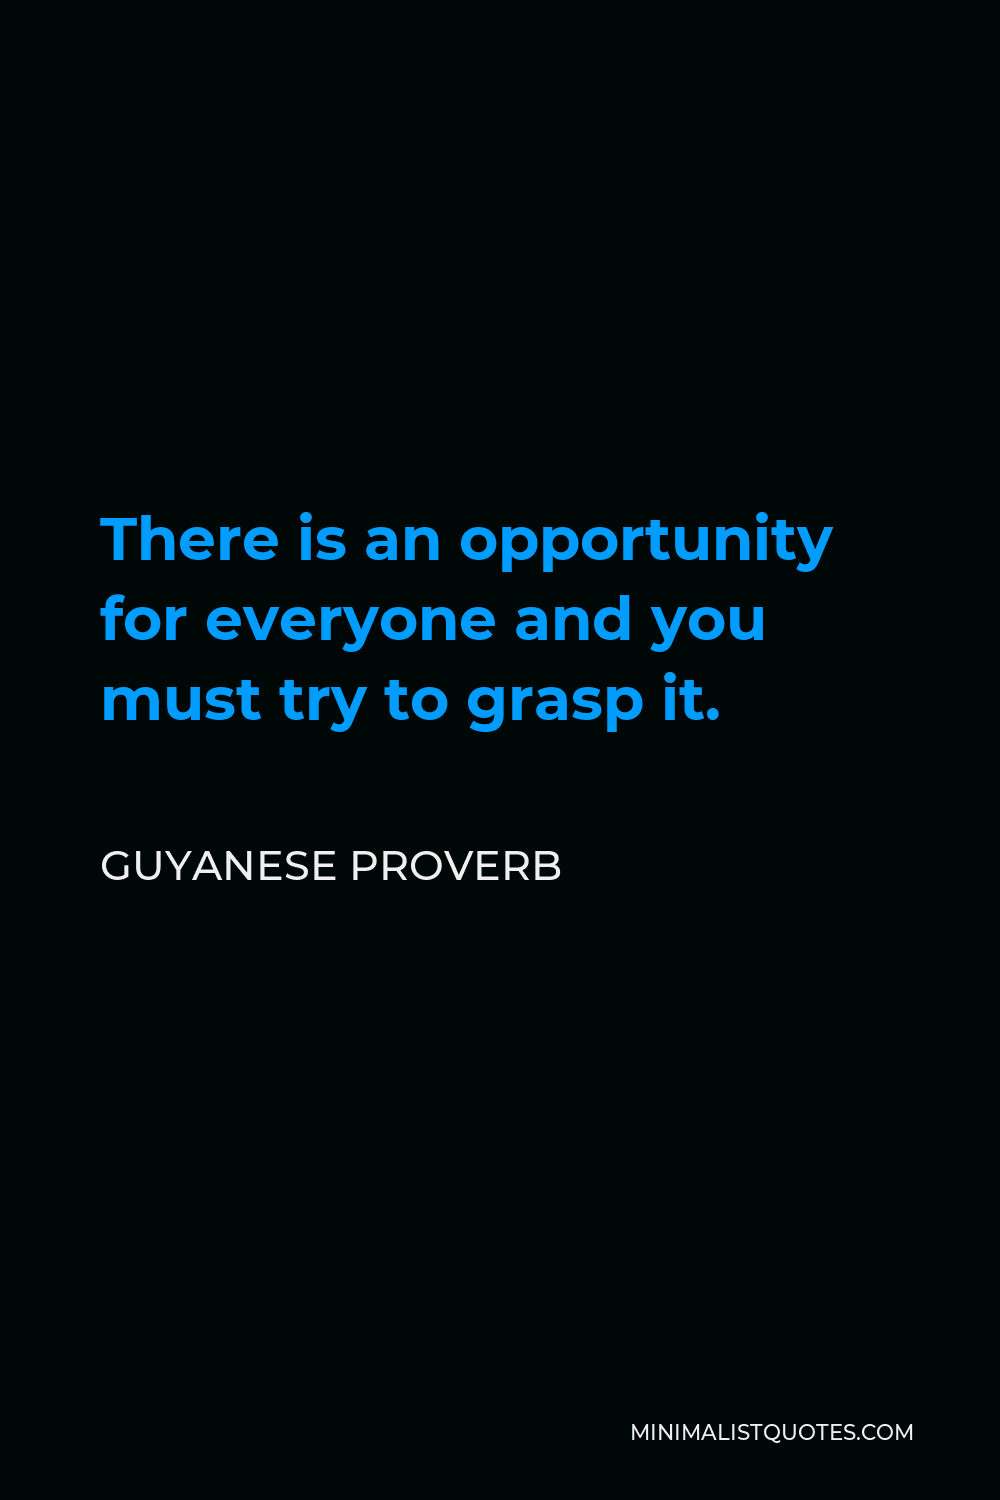 Guyanese Proverb Quote - There is an opportunity for everyone and you must try to grasp it.